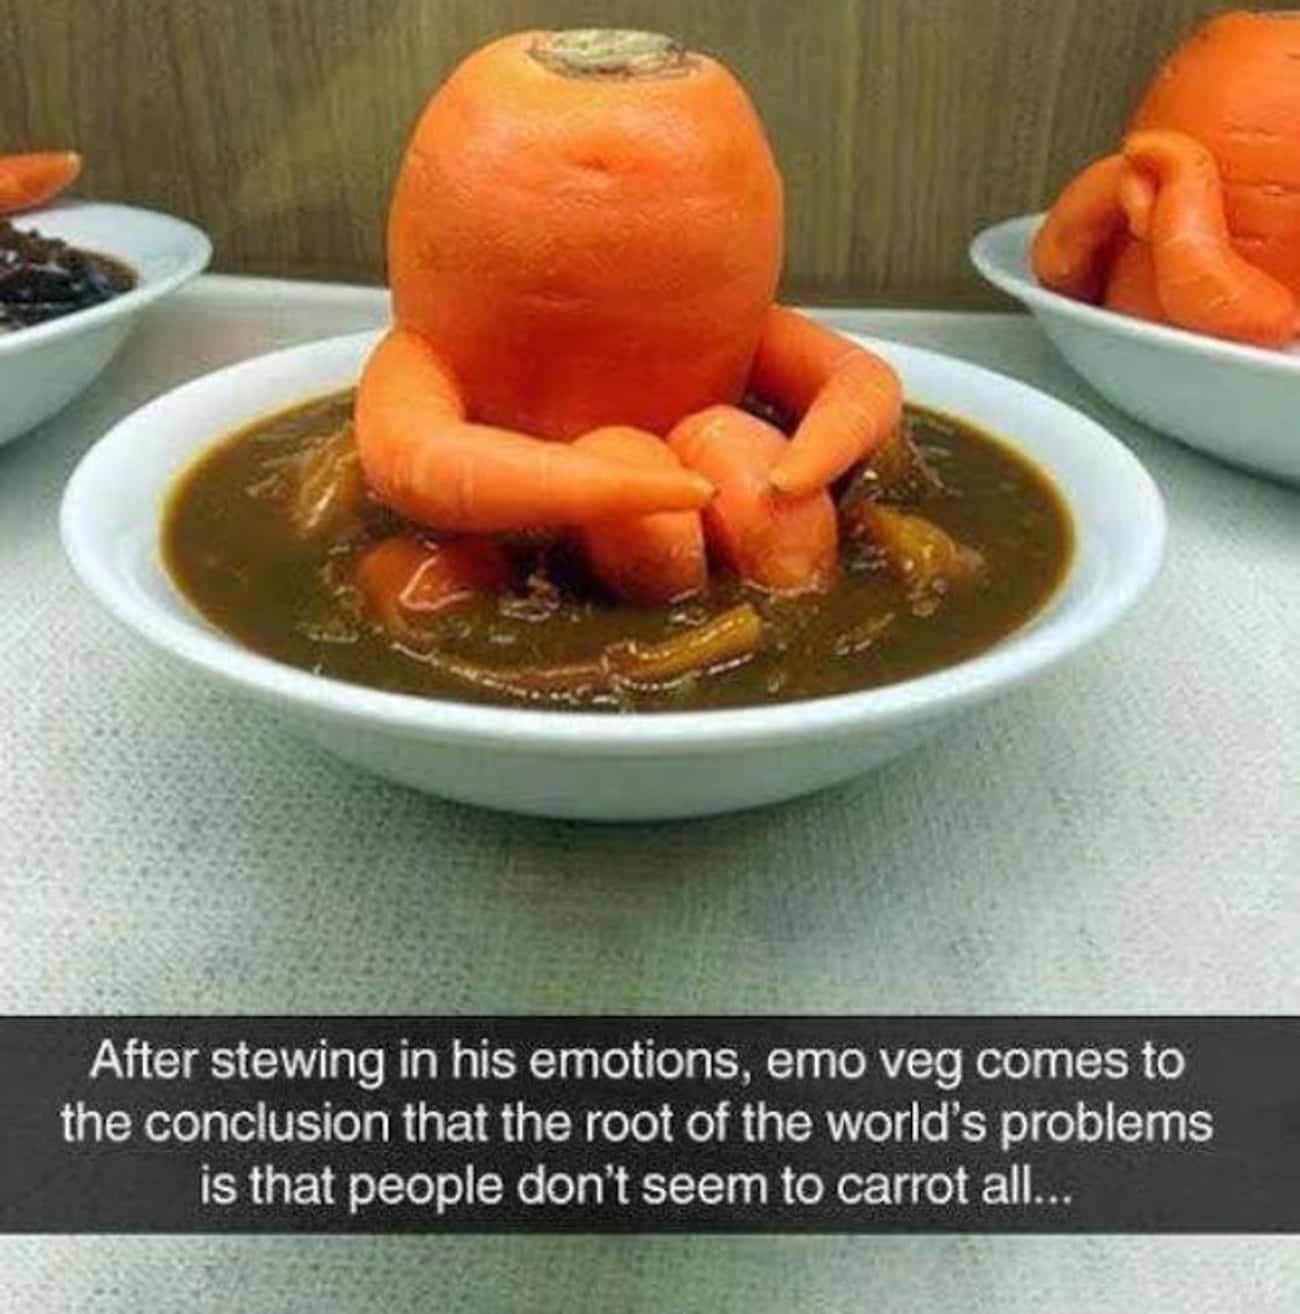 This Emo Carrot Having A Moment